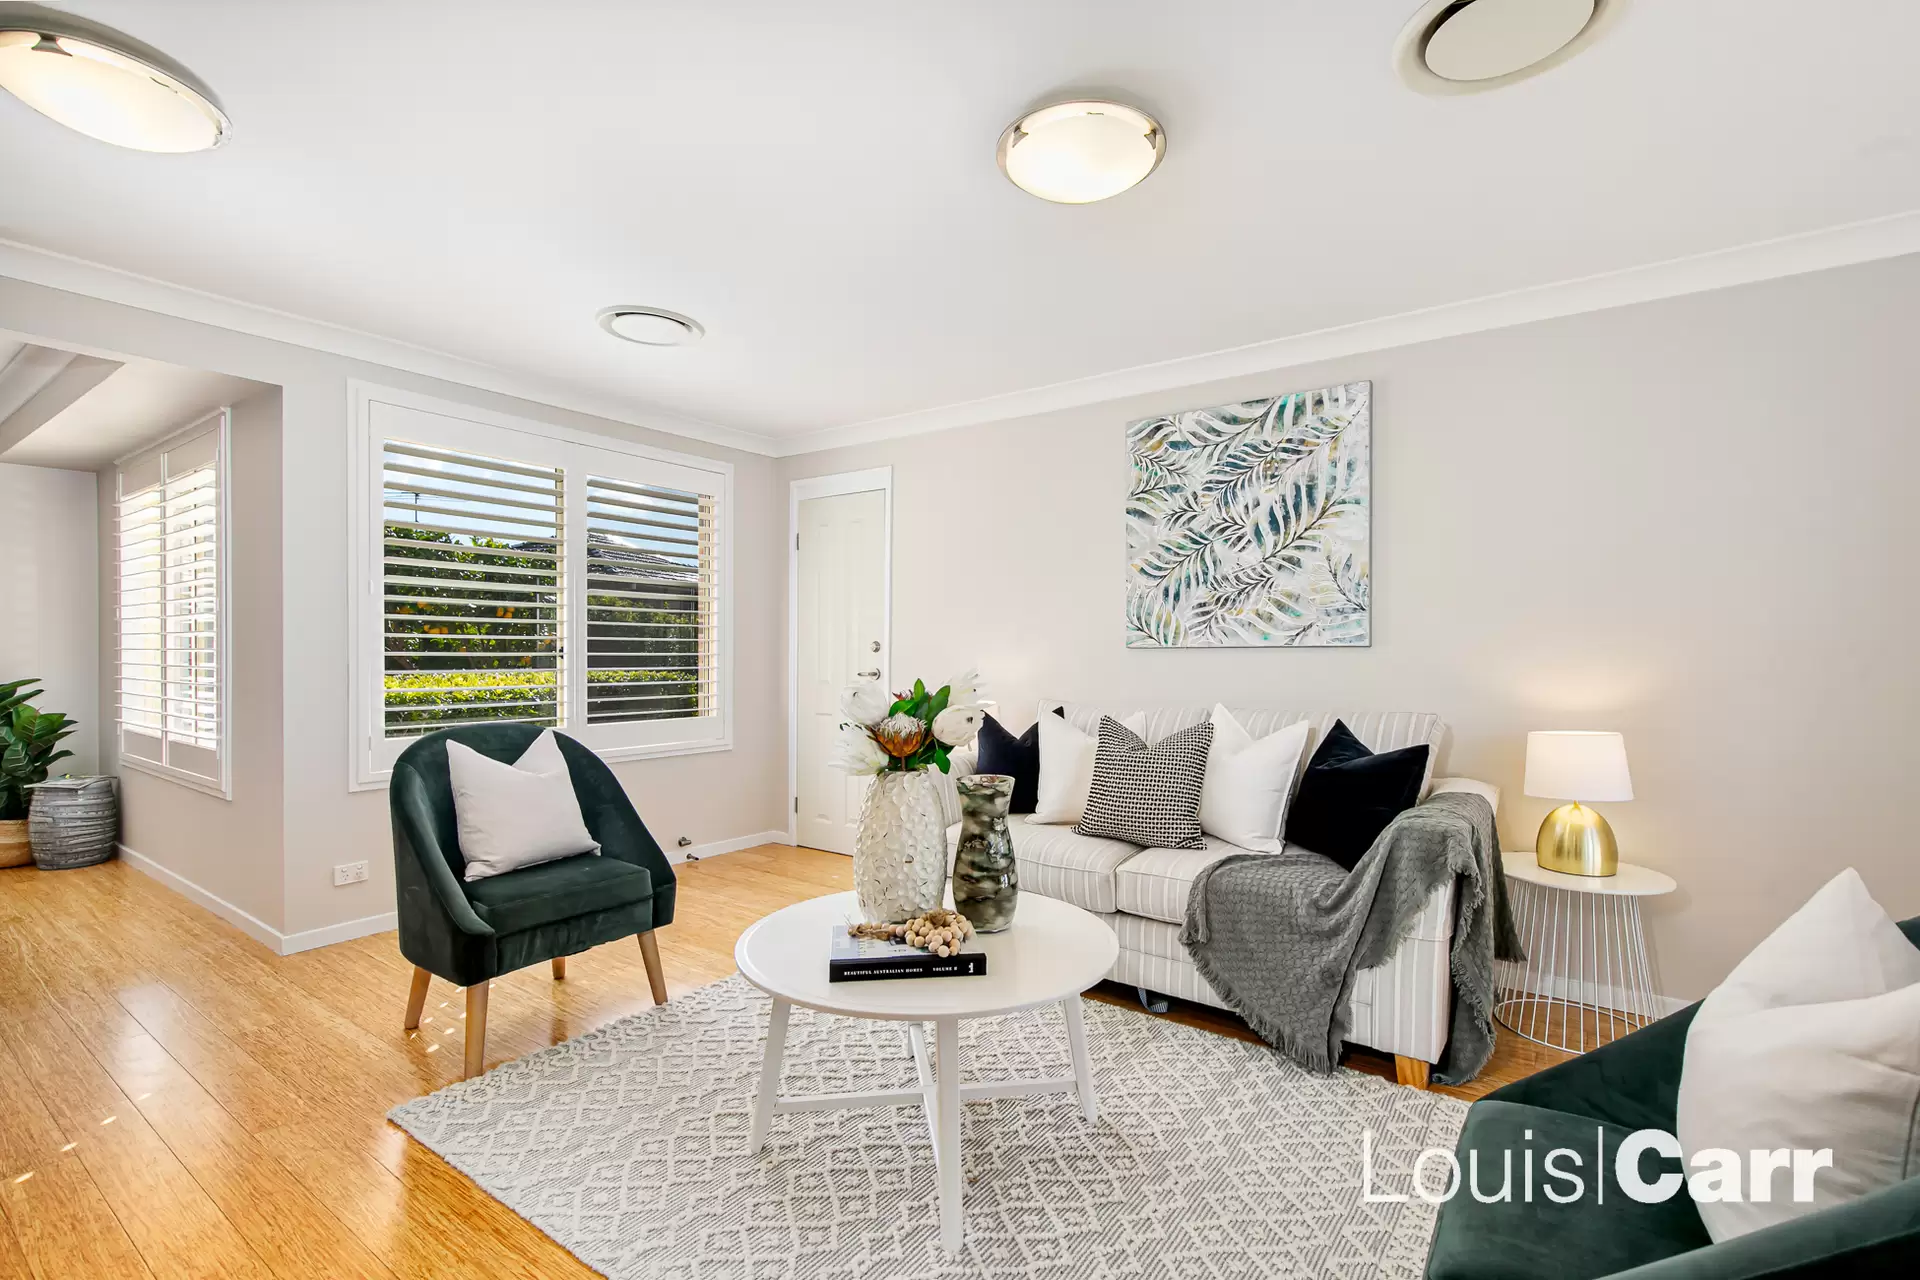 Photo #2: 4 Miranda Close, Cherrybrook - Leased by Louis Carr Real Estate